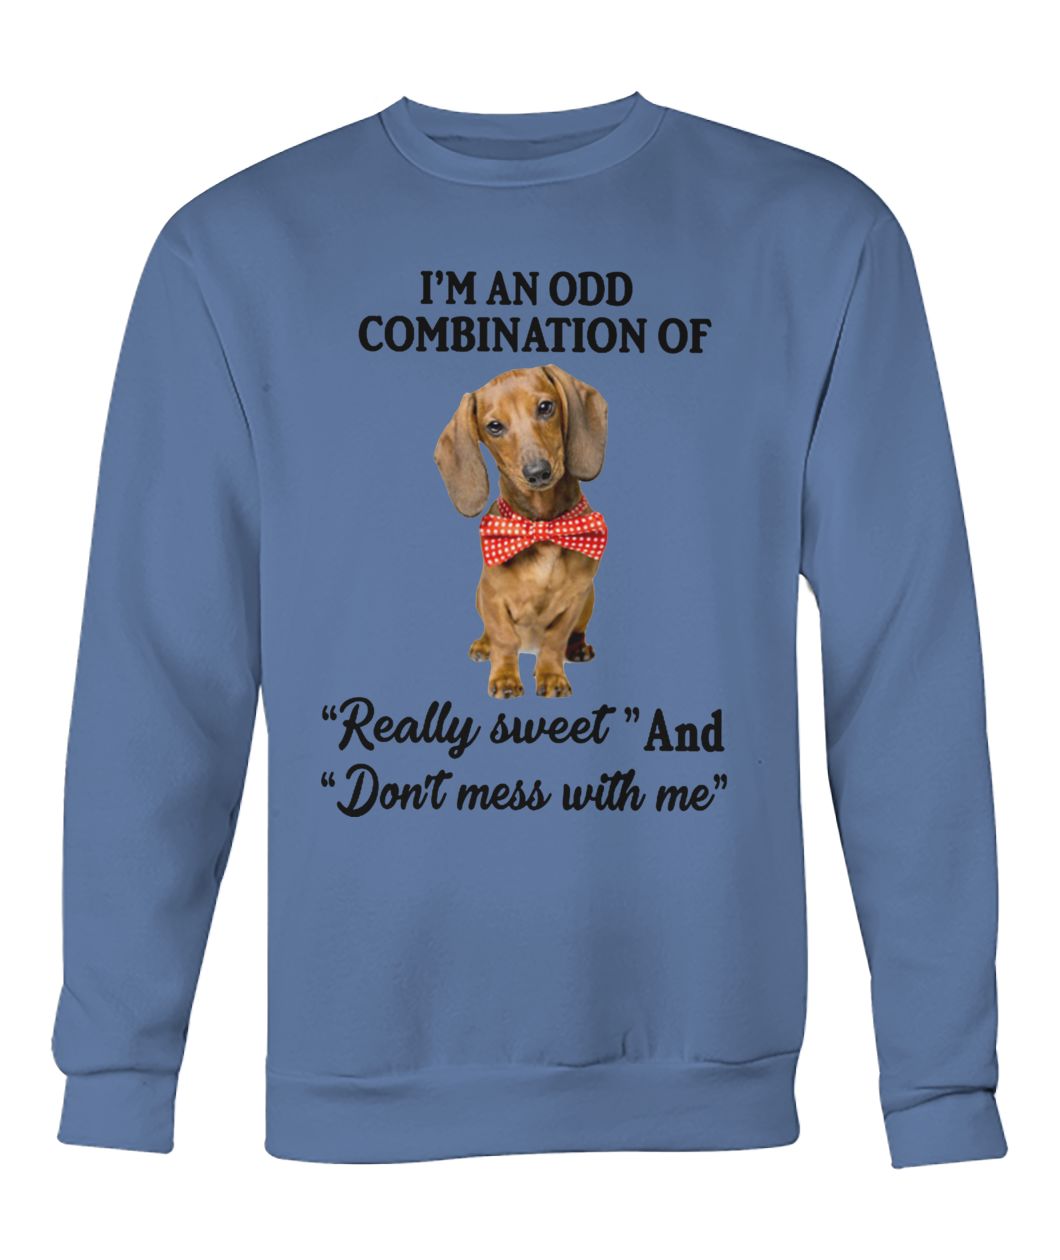 Dachshund I'm an odd combination of really sweet and don't mess with me crew neck sweatshirt